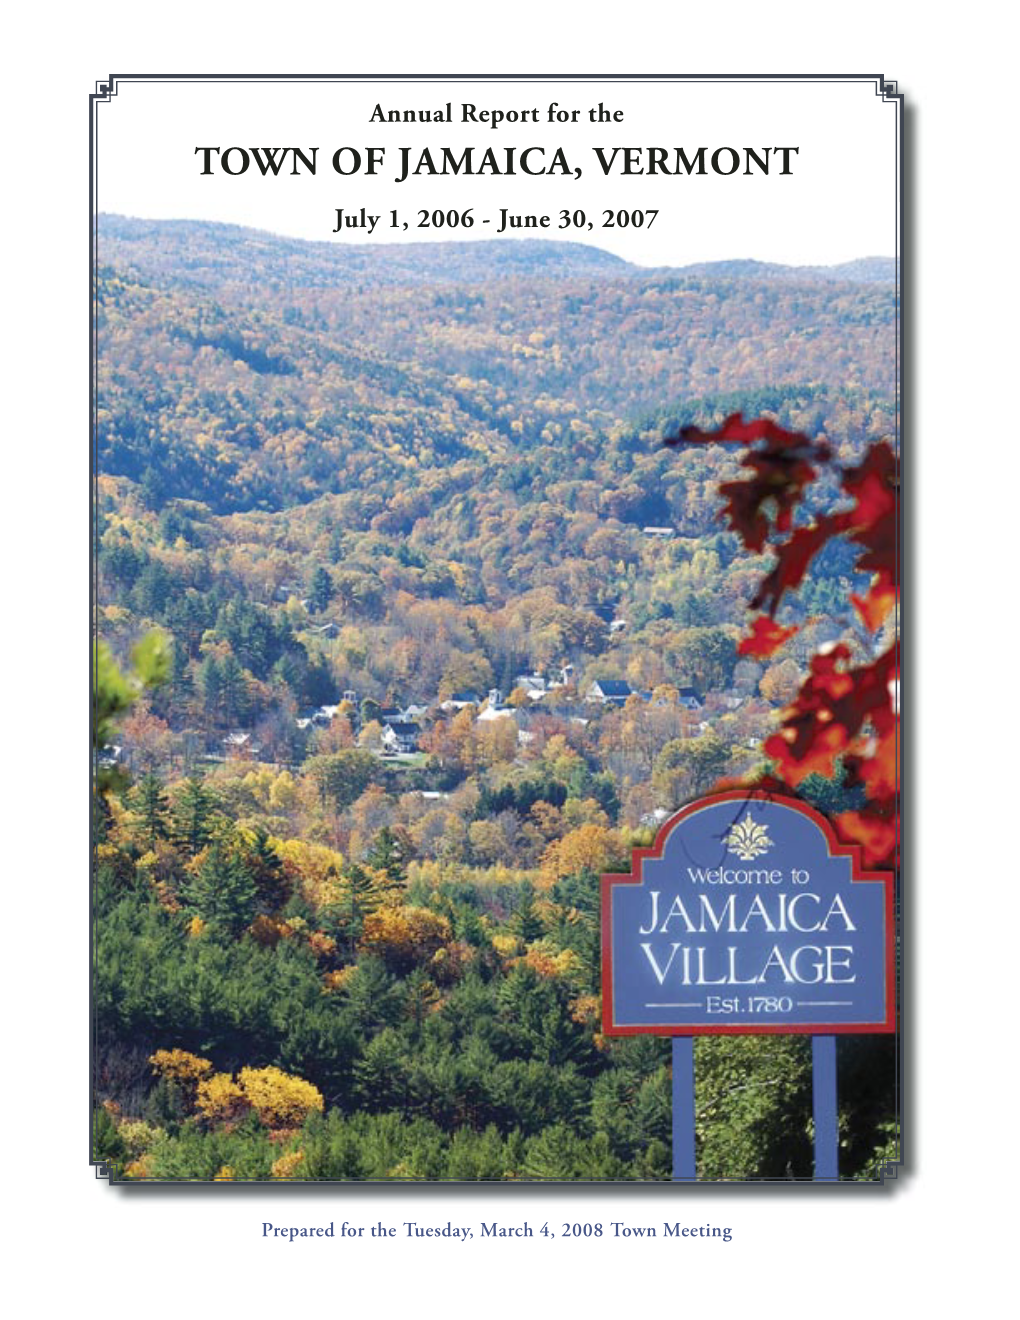 TOWN of JAMAICA, VERMONT July 1, 2006 - June 30, 2007